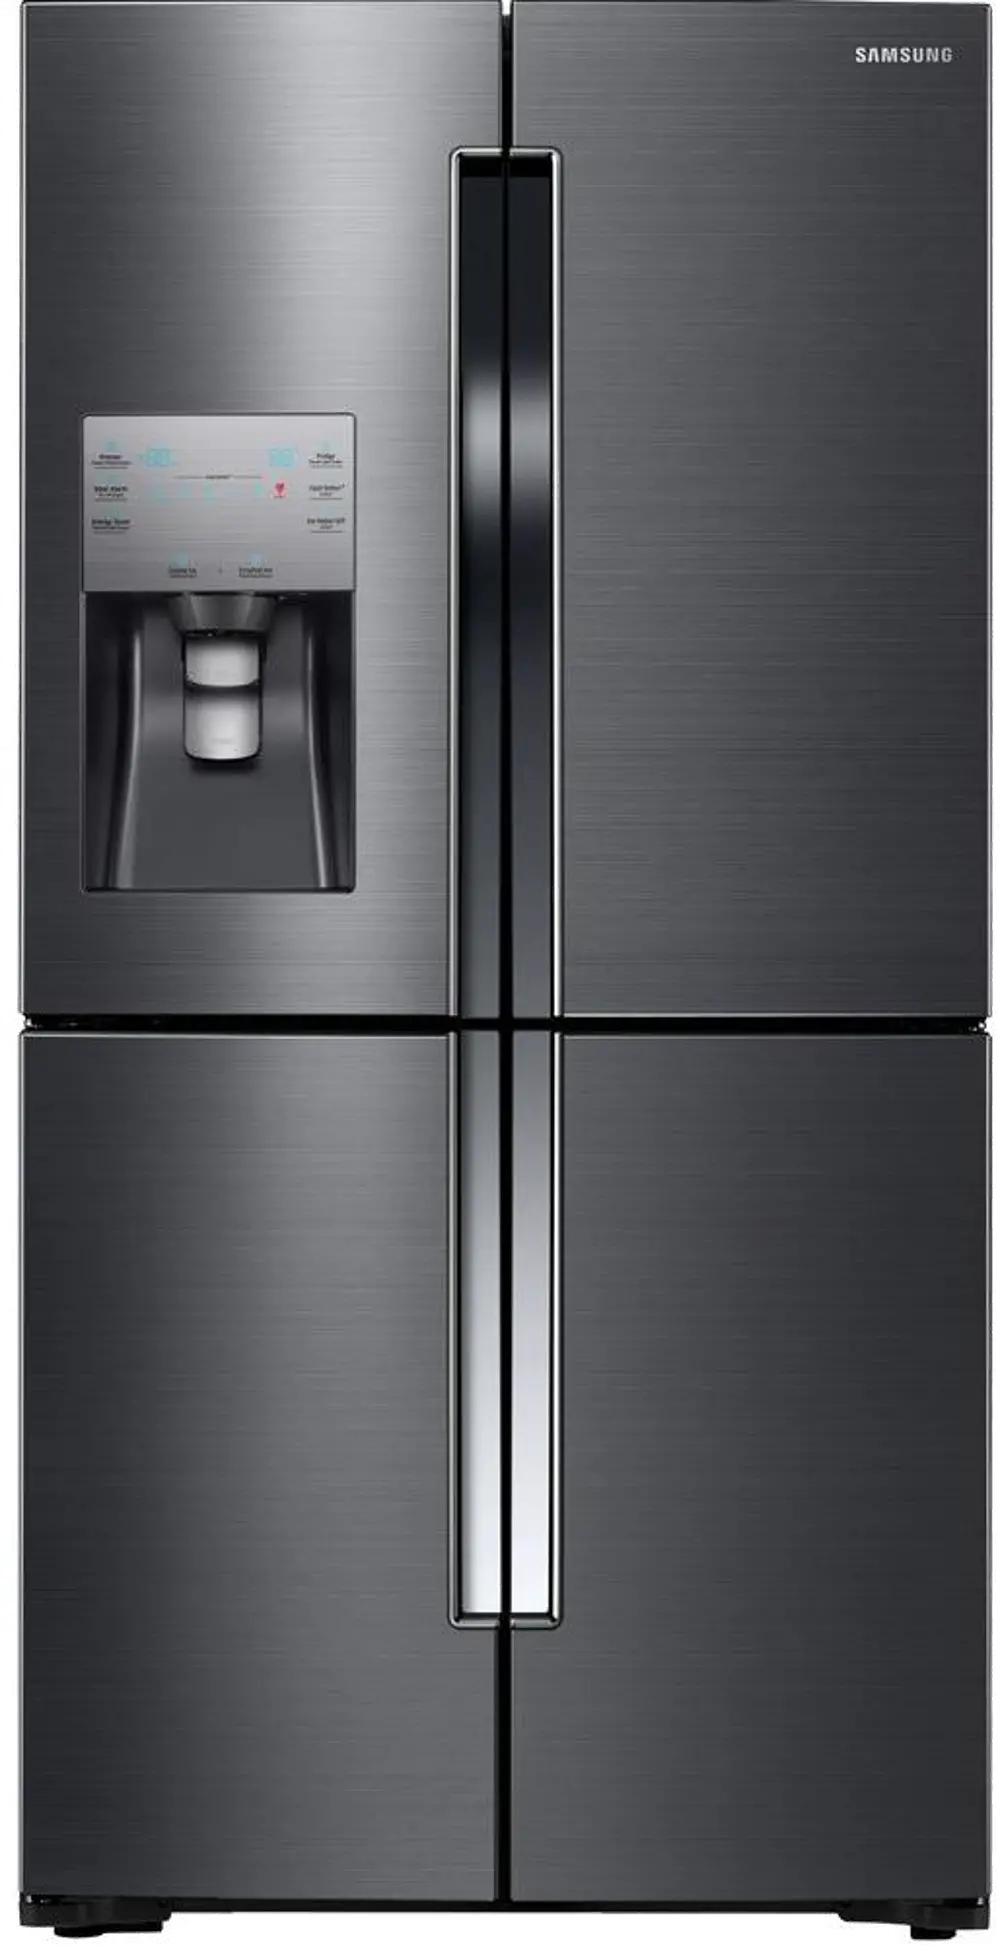 RF23J9011SG Samsung Counter Depth French Door Refrigerator with FlexZone - 22.5 cu. ft., 36 Inch Black Stainless Steel-1